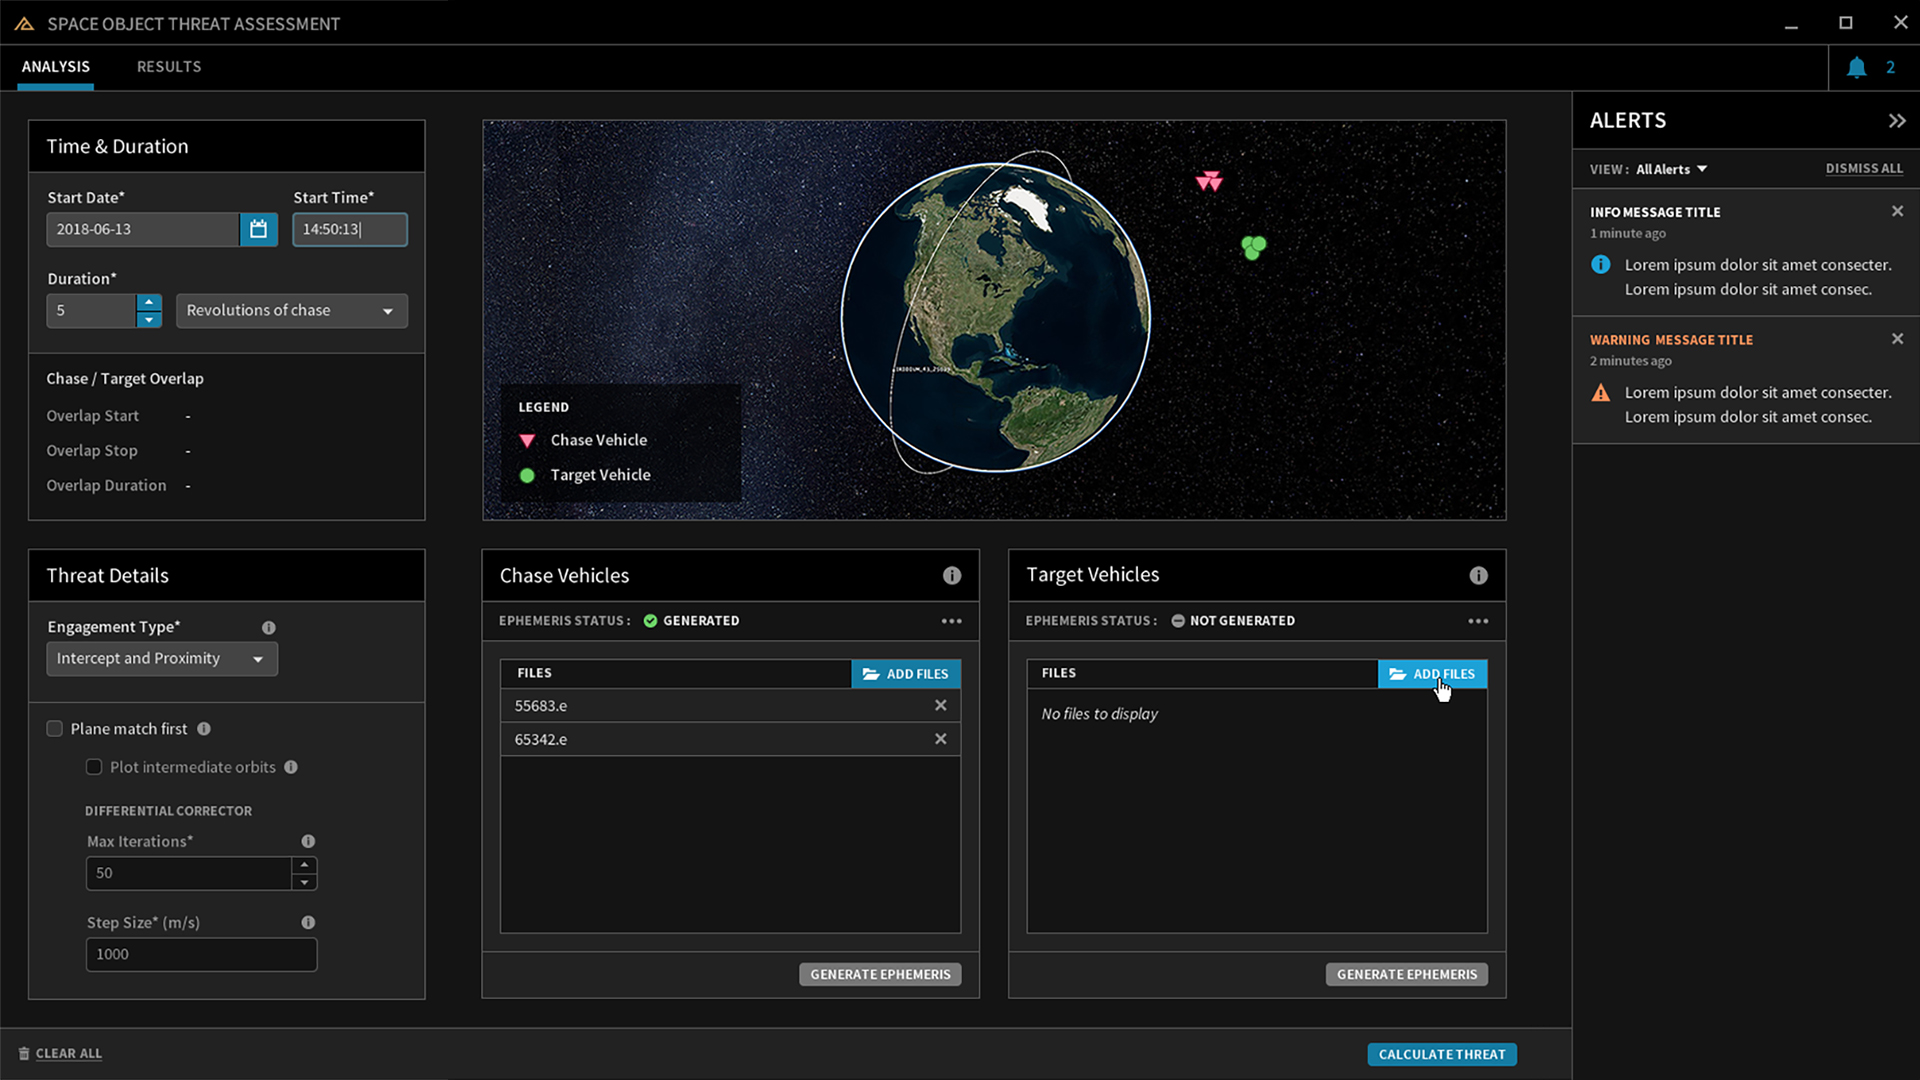 Picture of VEDCOMSPOC's Space Object Threat Assessment (SOTA) dash panel detailing chase and target vehicles their engagement type and alerts. 